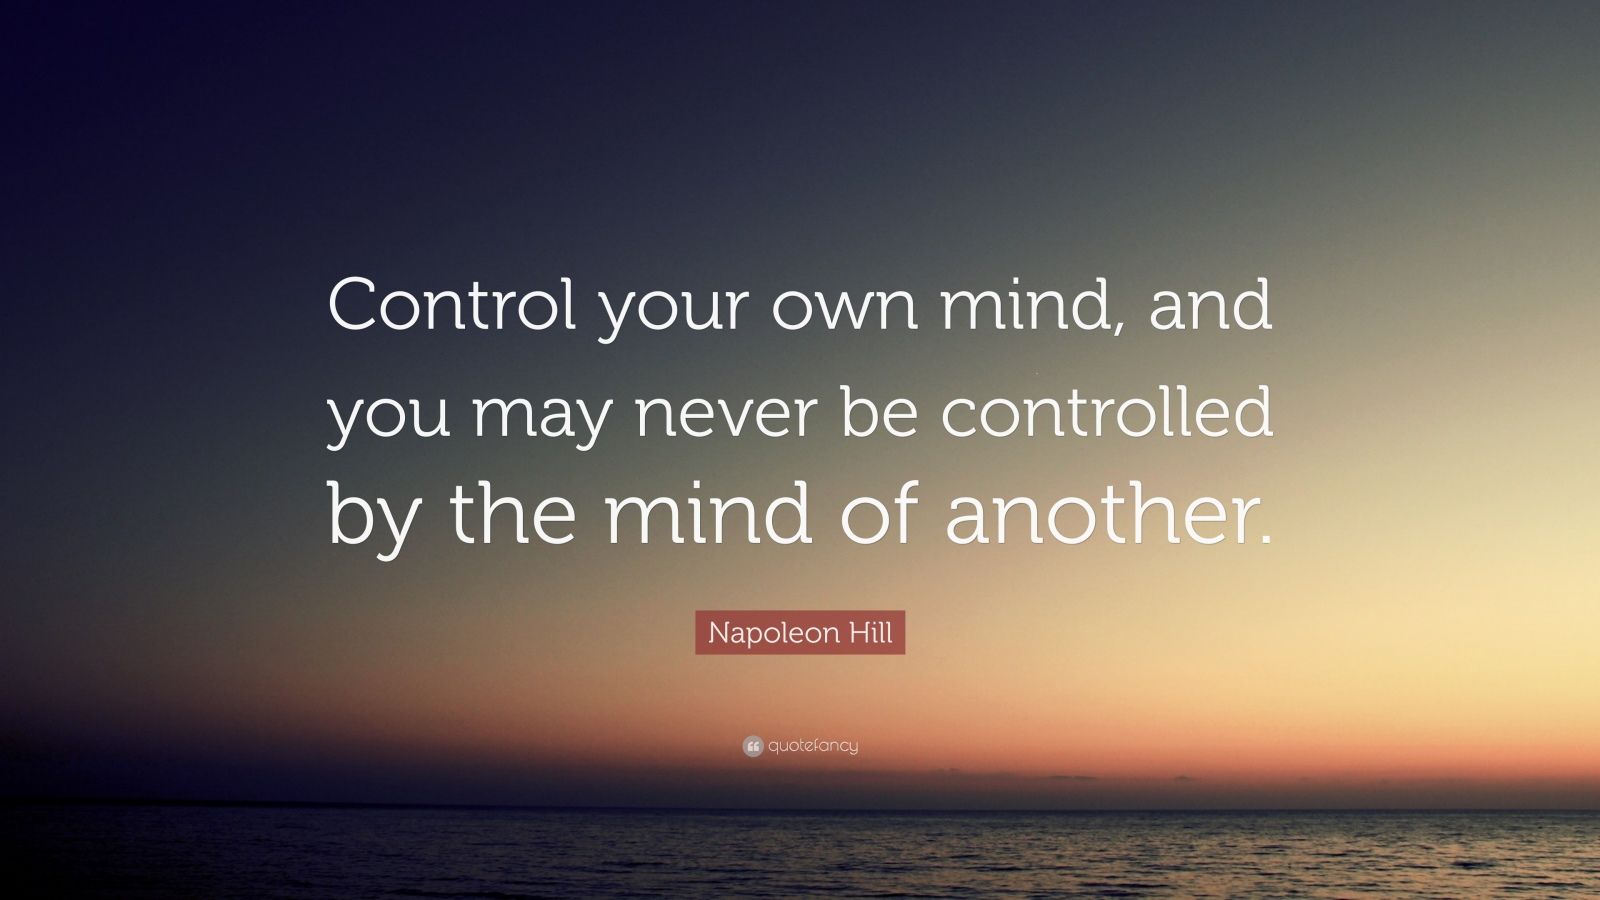 Napoleon Hill Quote: “Control Your Own Mind, And You May Never Be